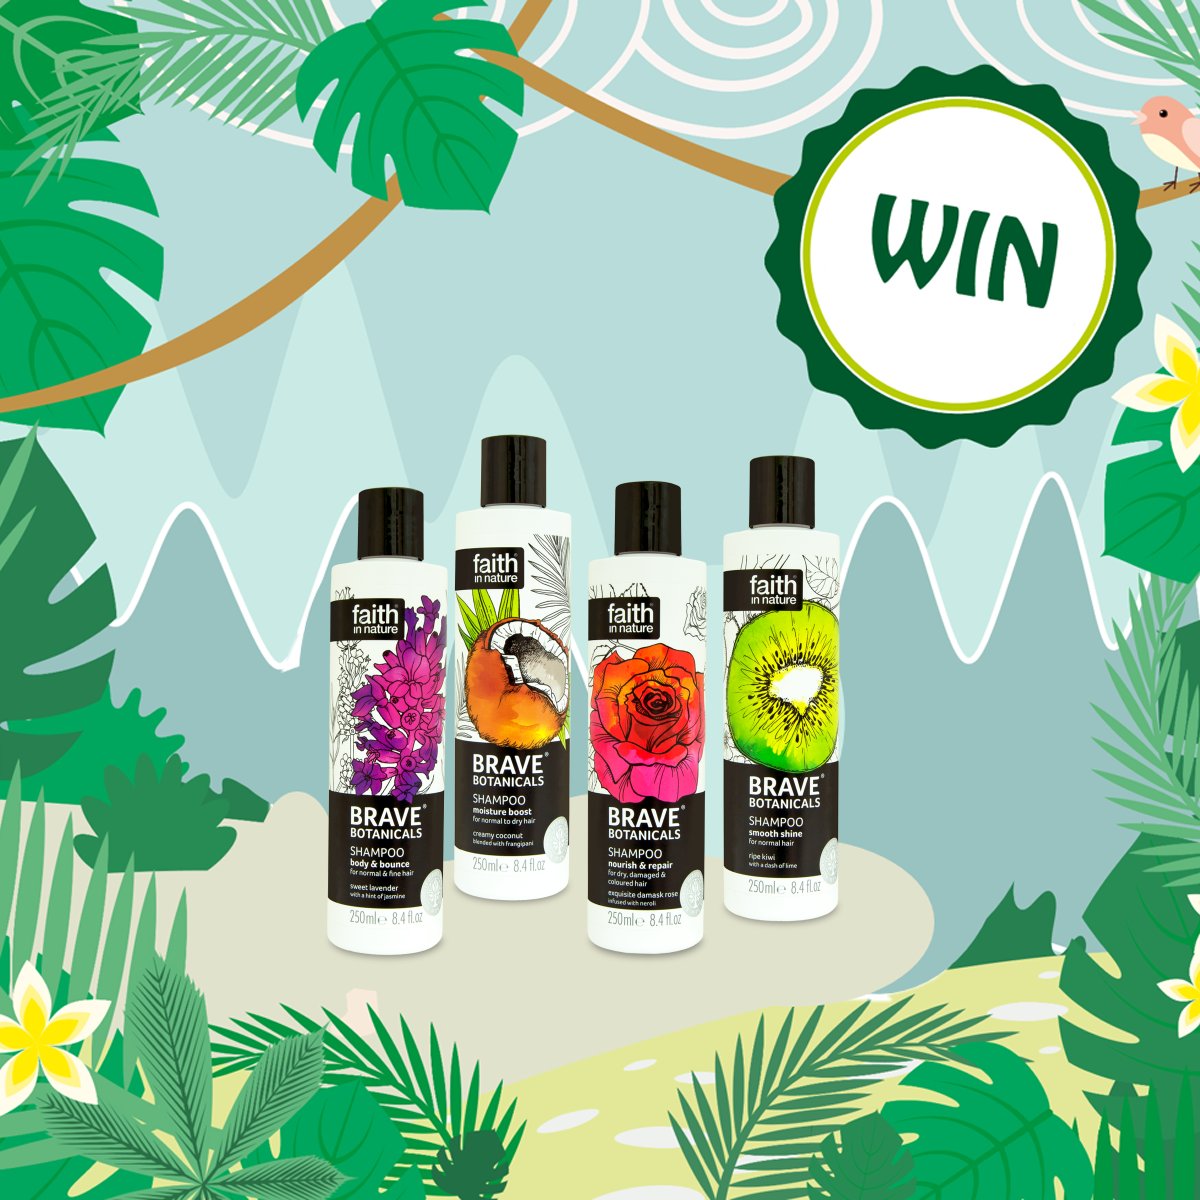 It's so hard to pick our fave @FaithInNature flavour! Let us know yours and you could win 1 of 3 shampoo bundles! https://t.co/19hZ8nbVMf